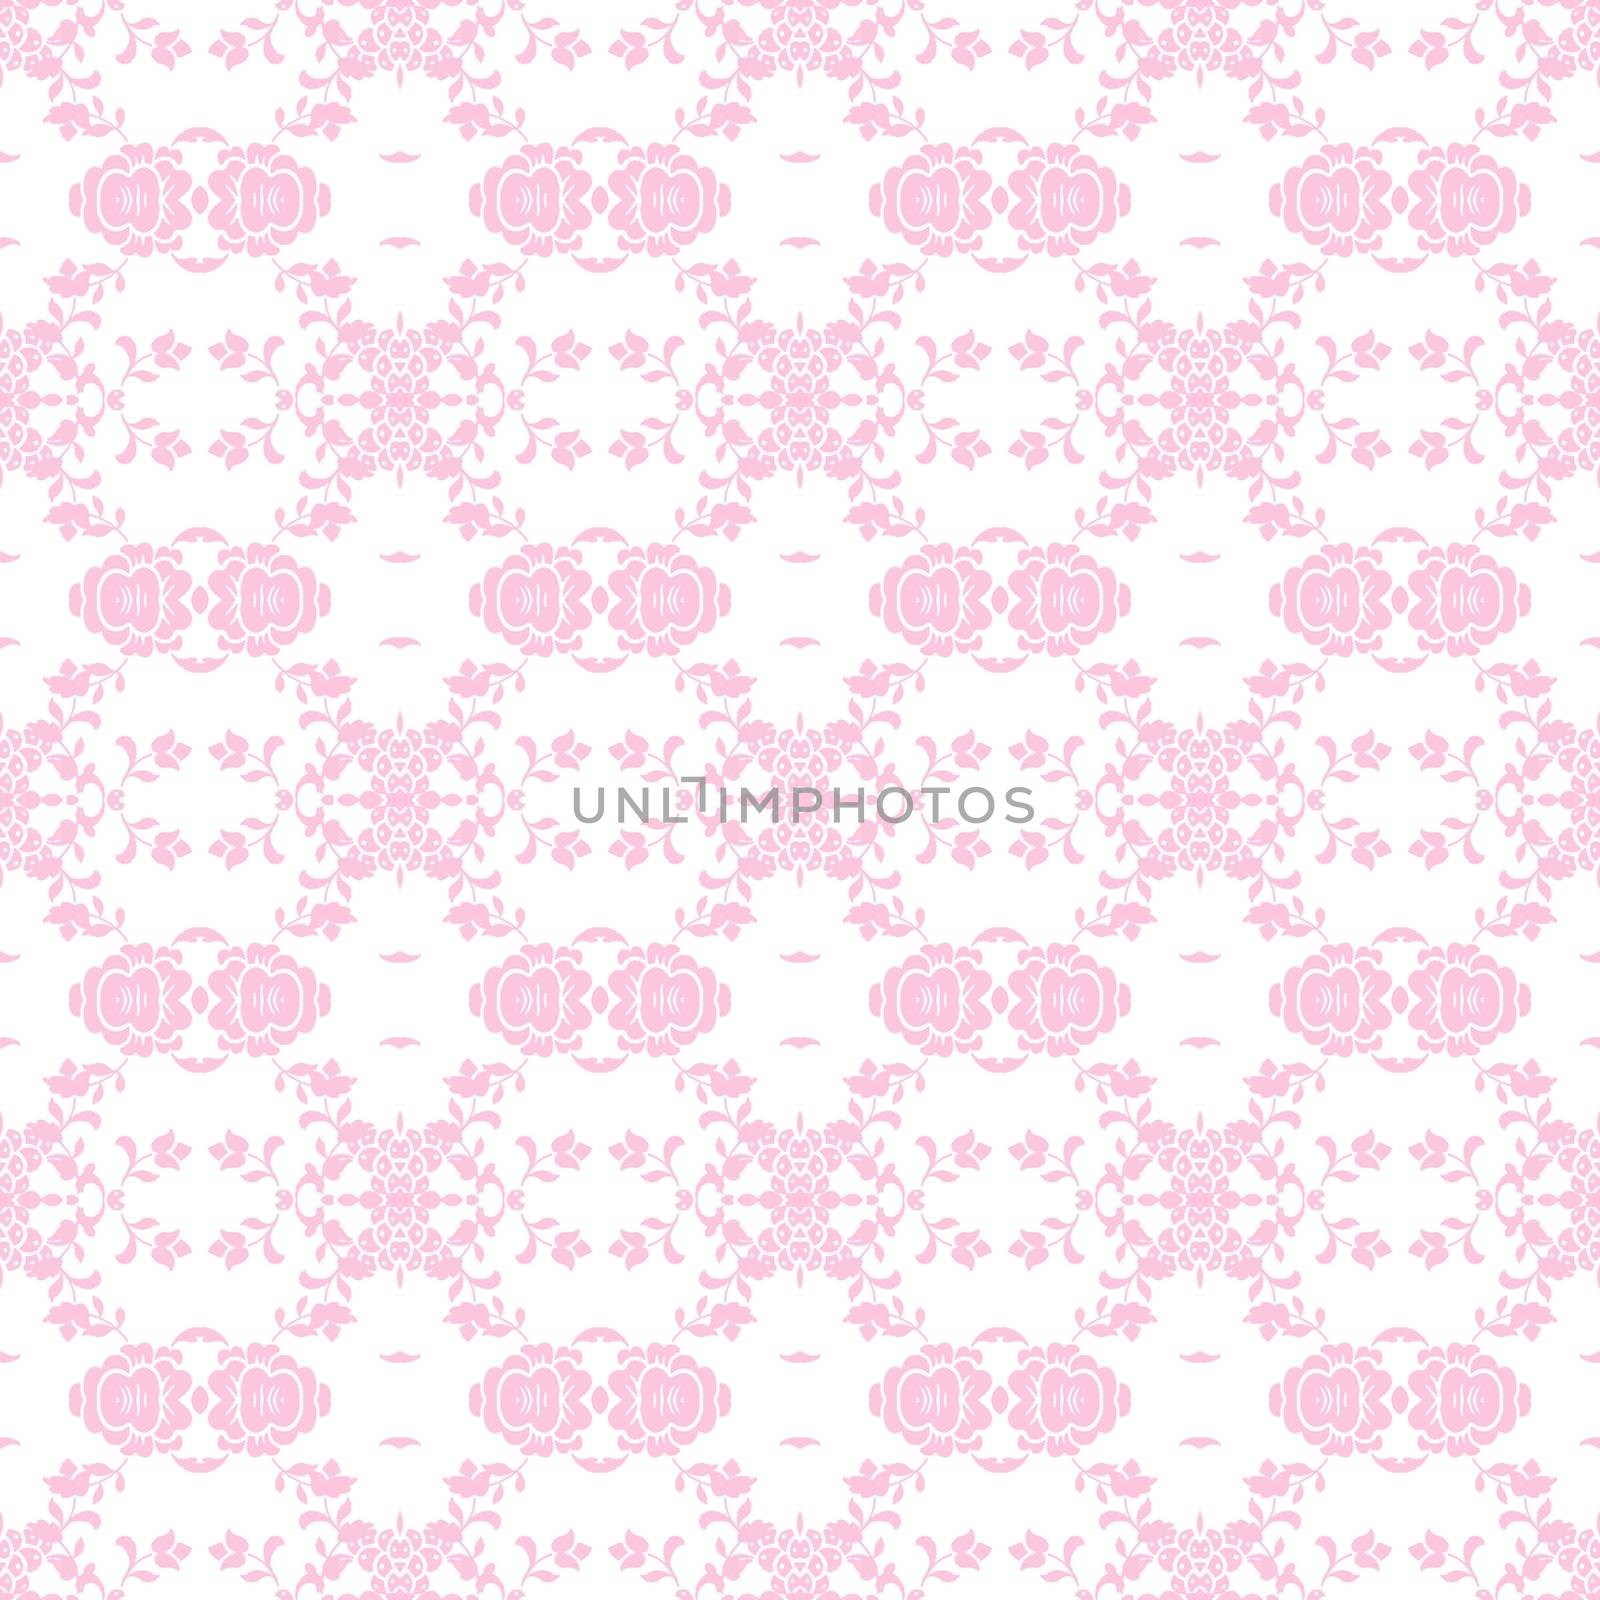 Baby pink vine and cluster elements in a damask style pattern